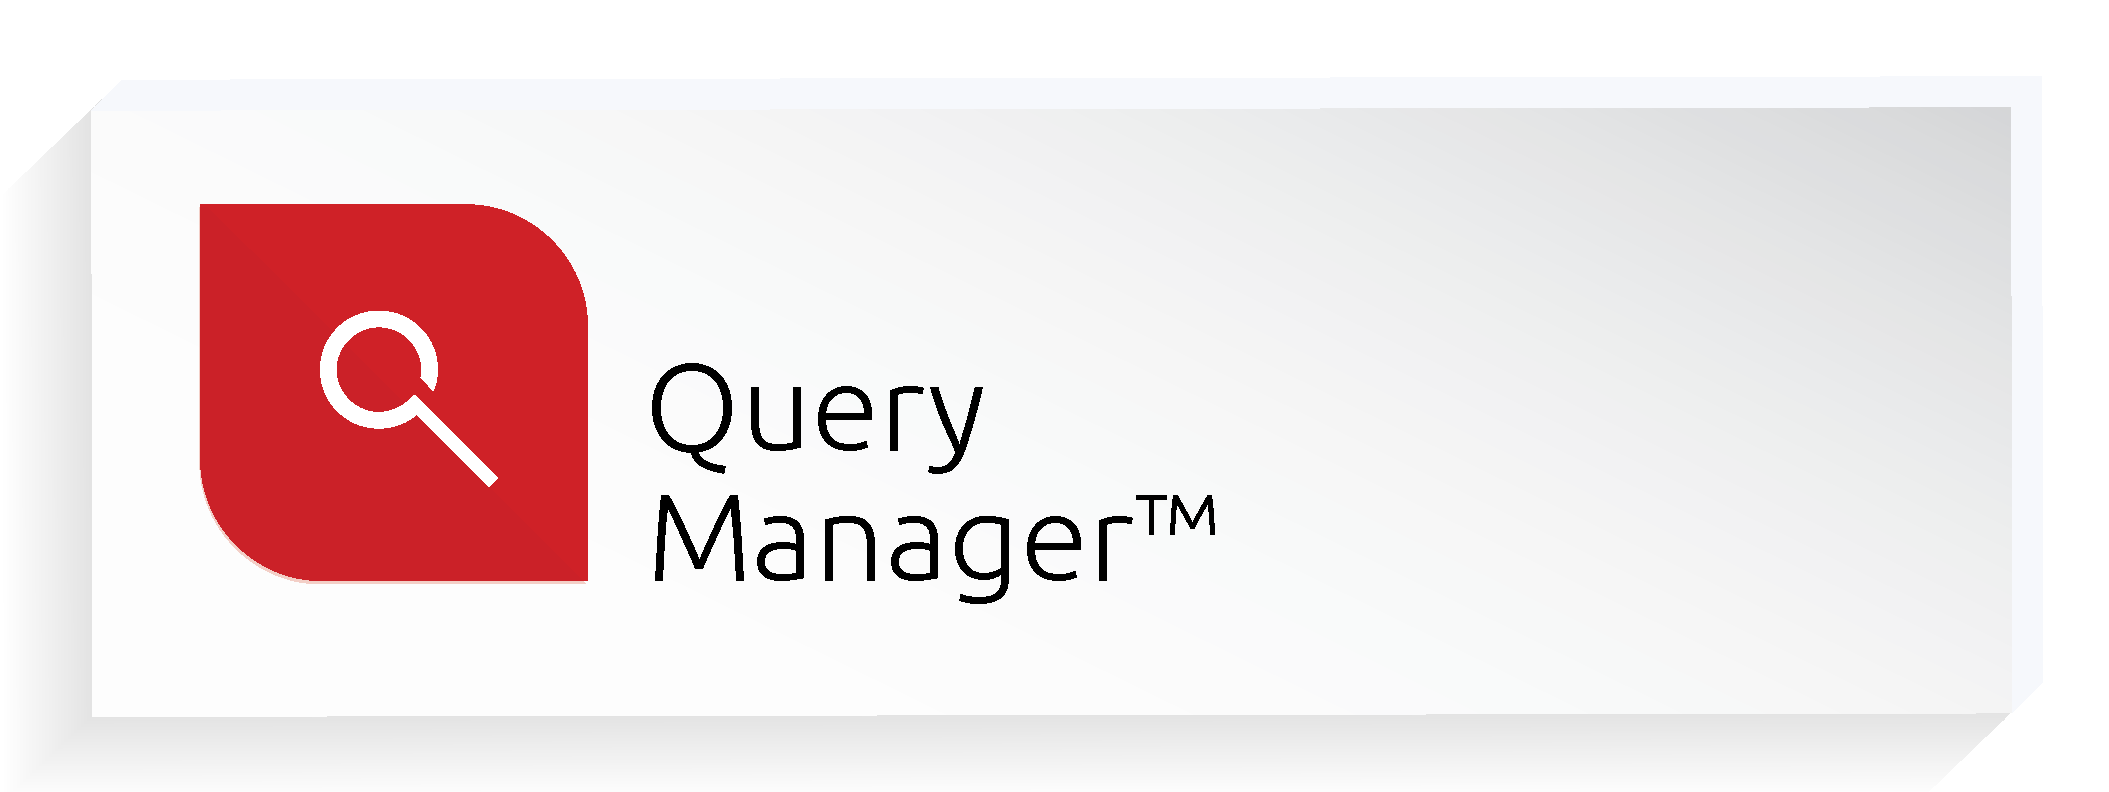 Query Manager-1